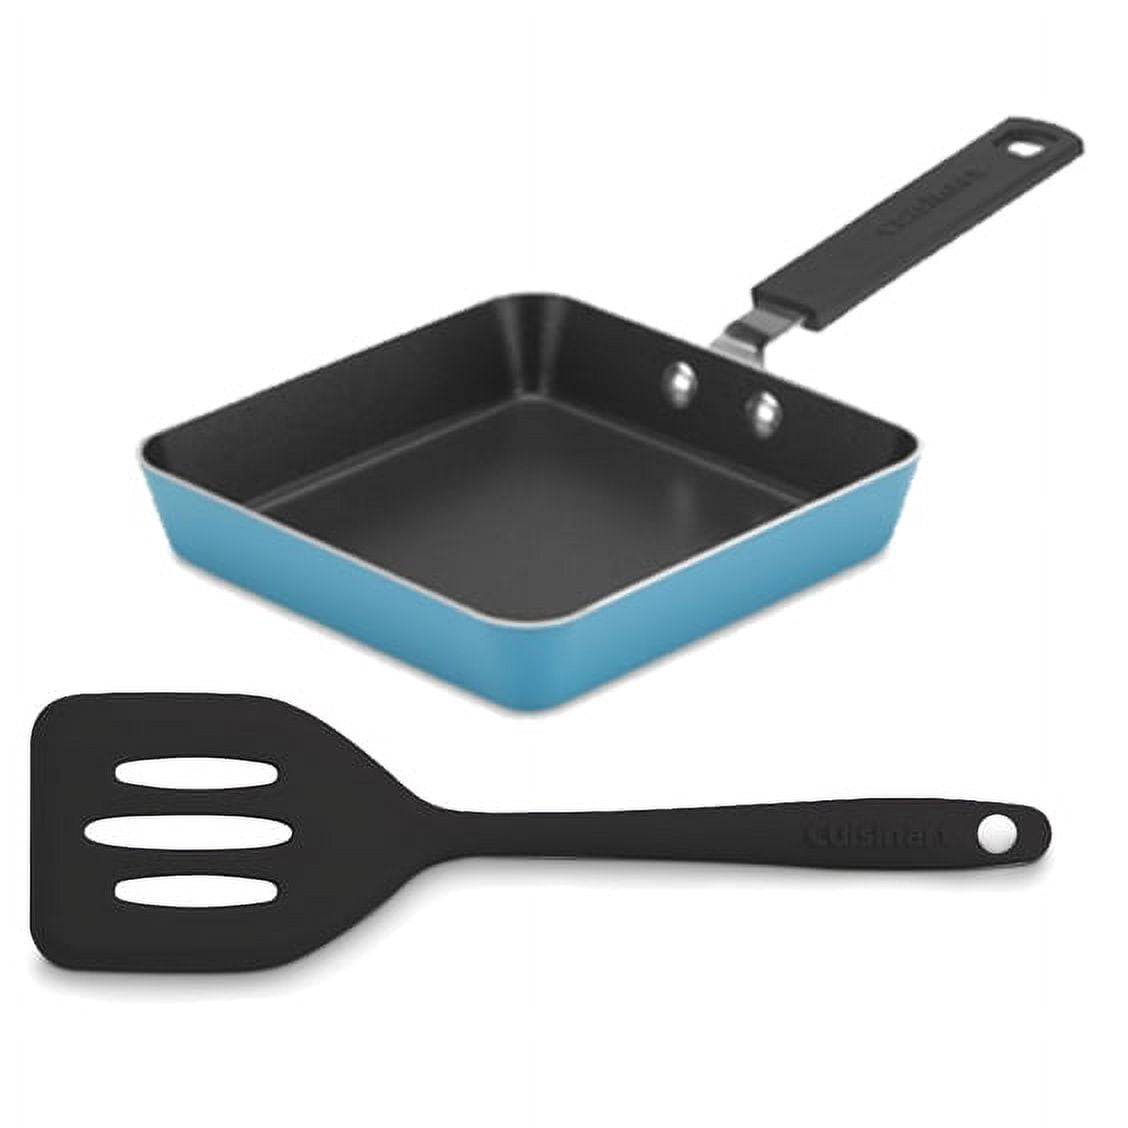 Cuisinart Mini Square Nonstick Fry Pan with Slotted Turner - Blue